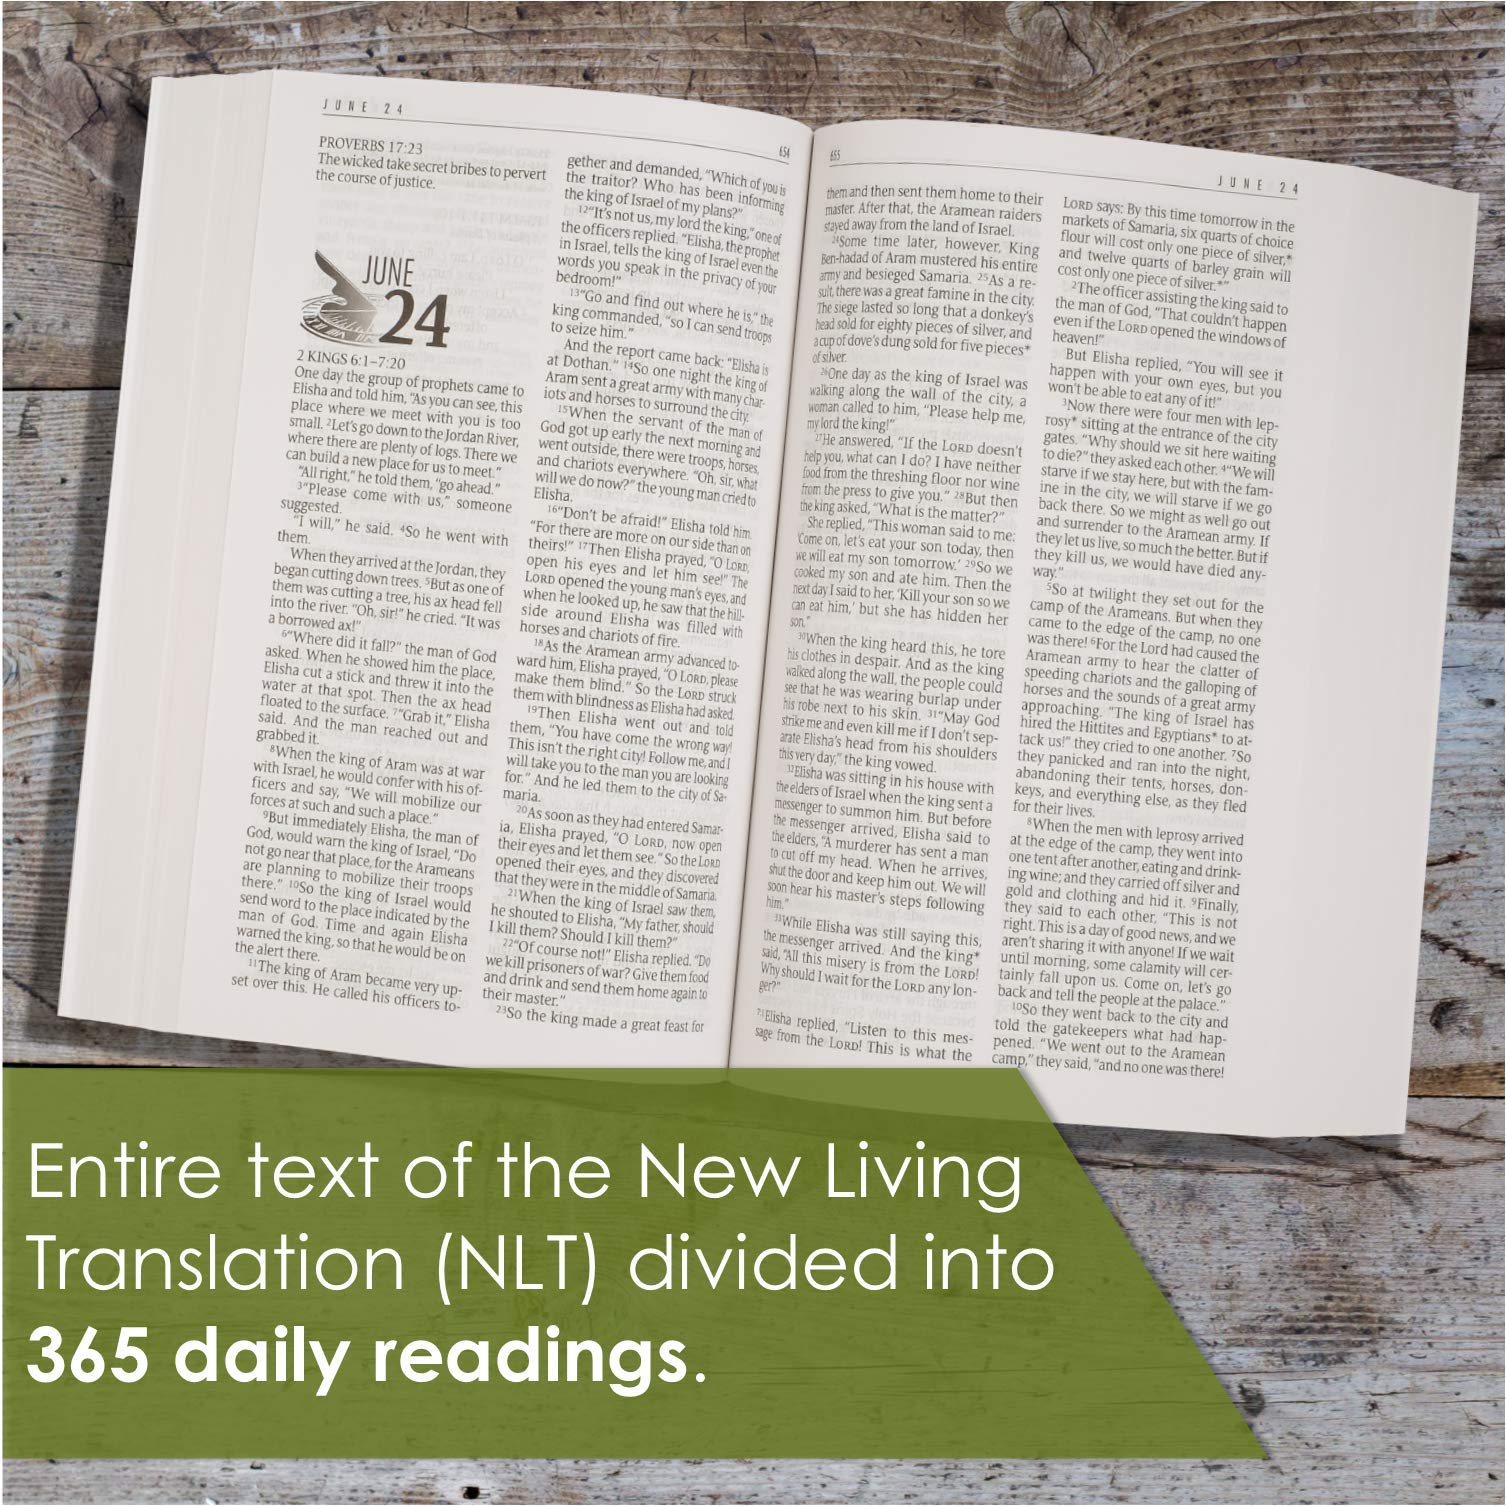 The One Year Bible NLT (Softcover): The Entire Bible in 365 Readings in the Clear and Trusted New Living Translation